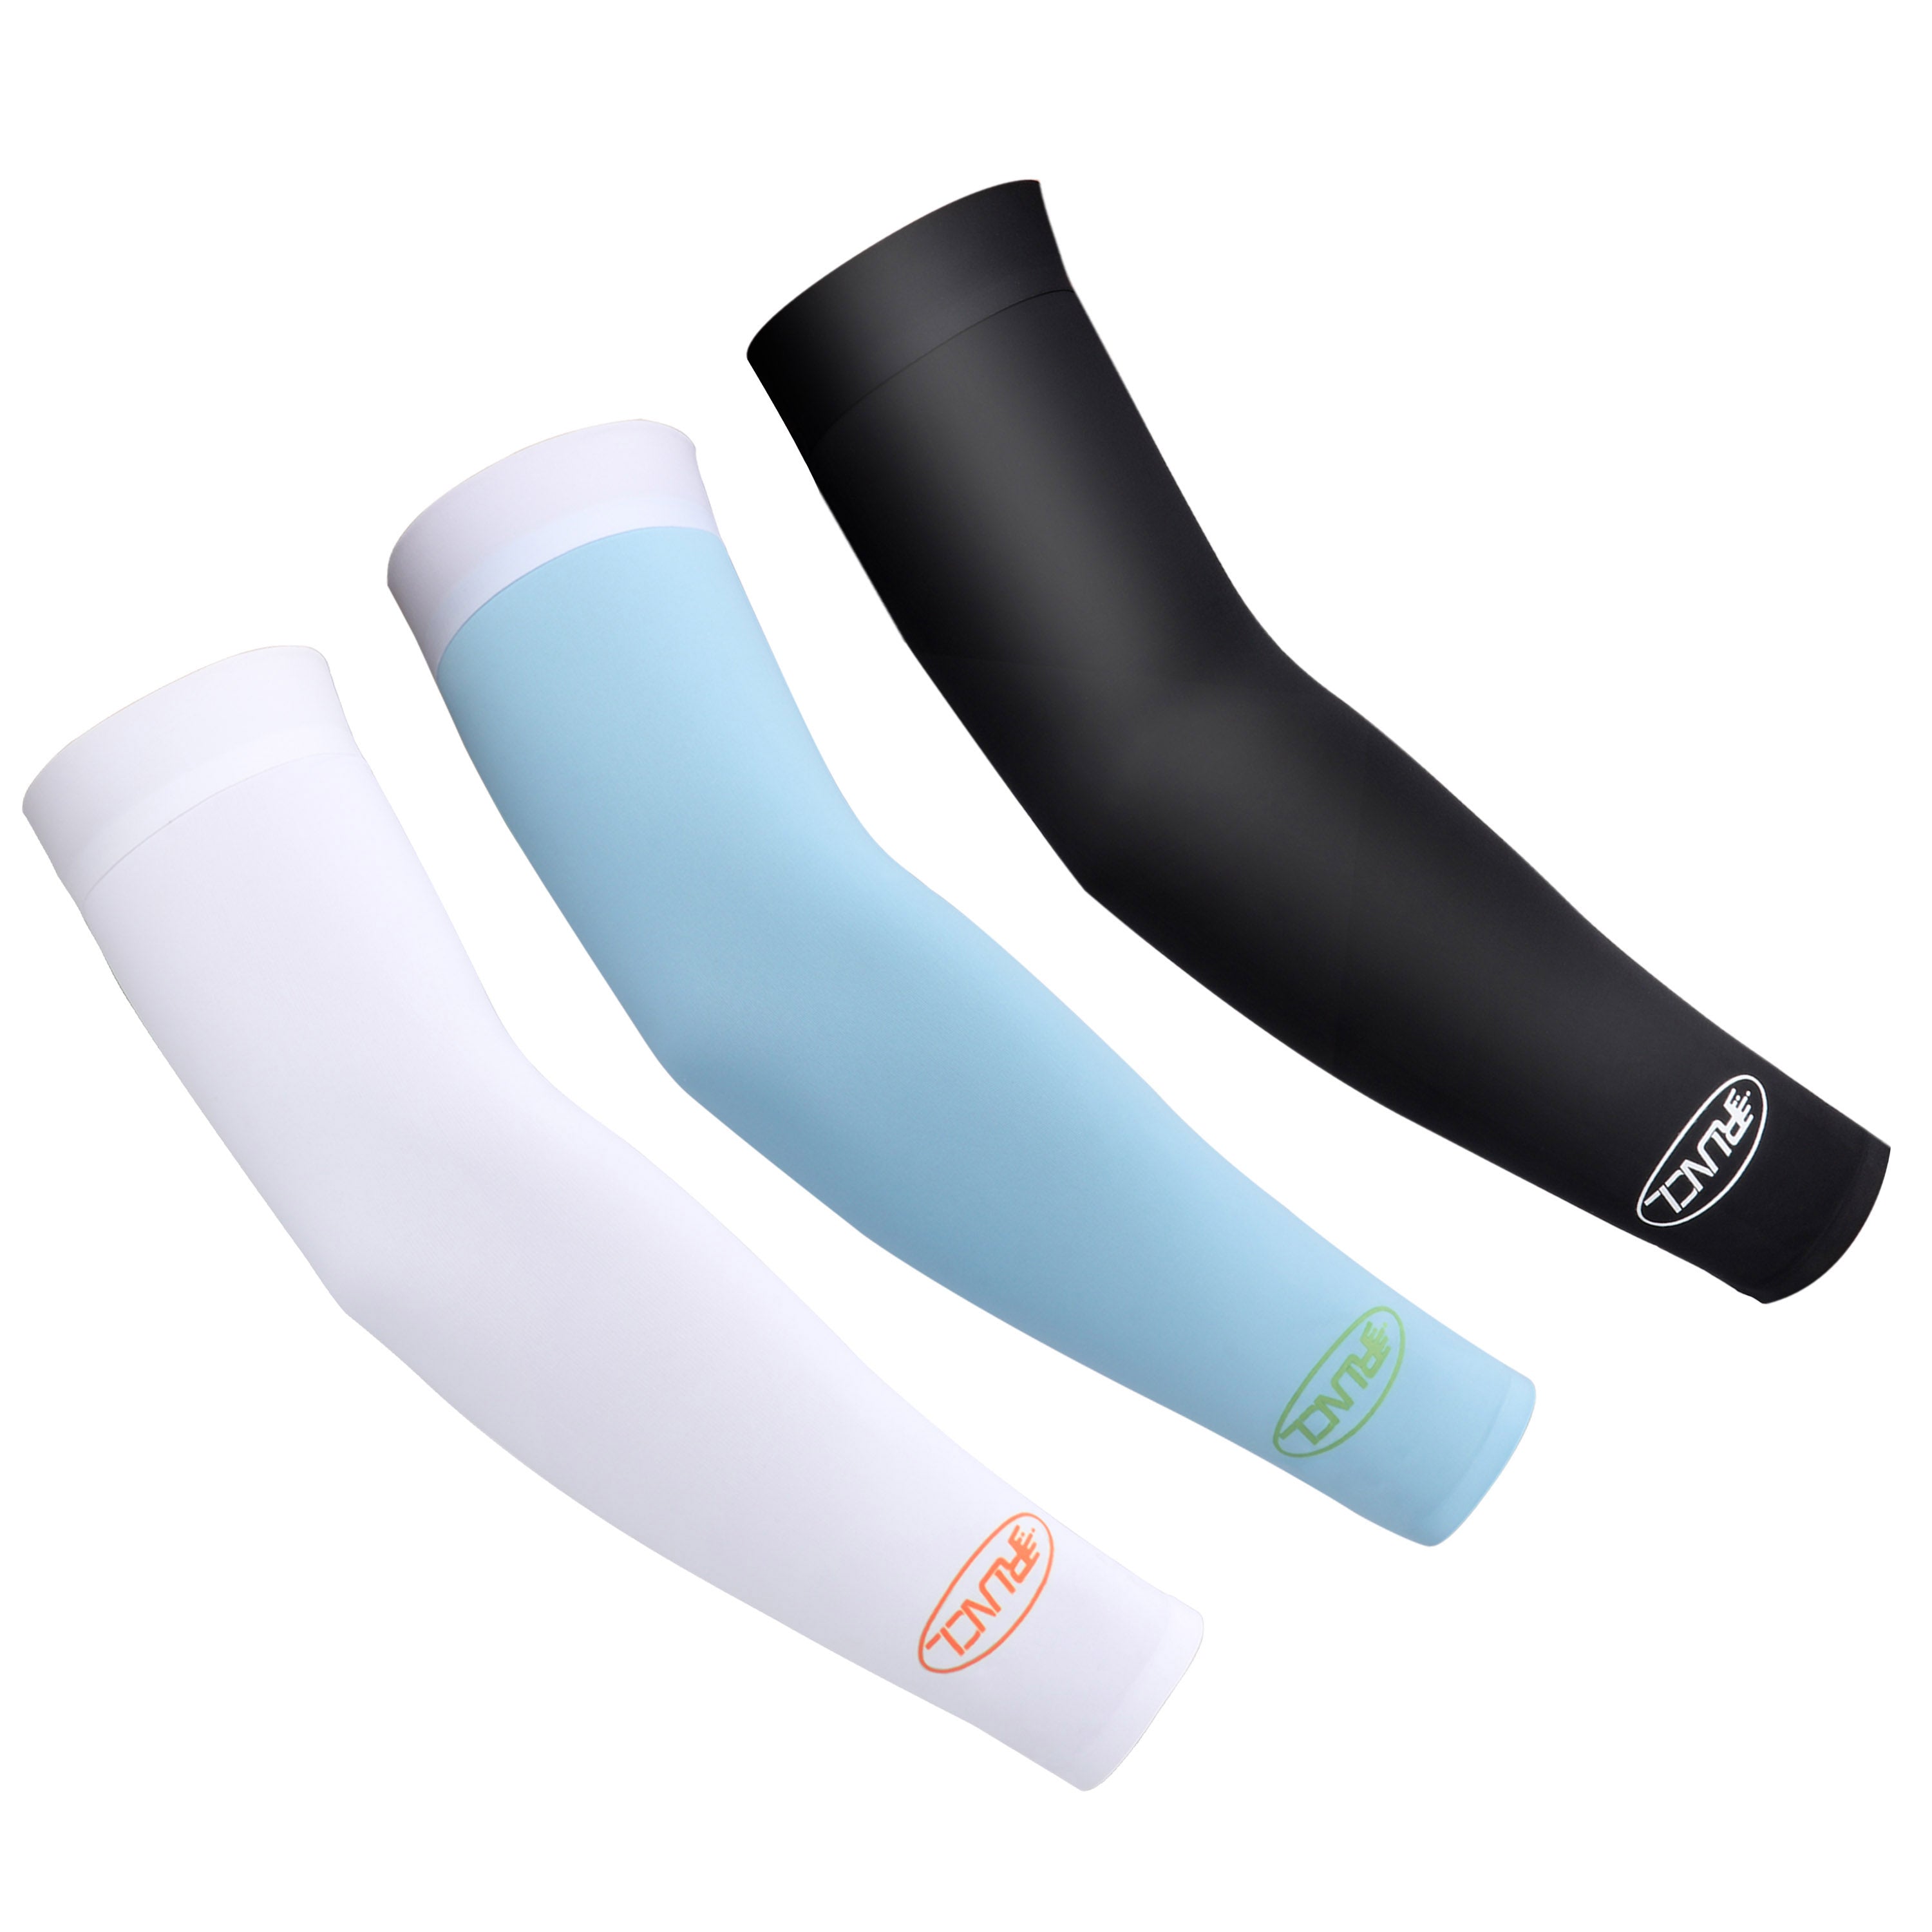 Protector Arm Sleeves